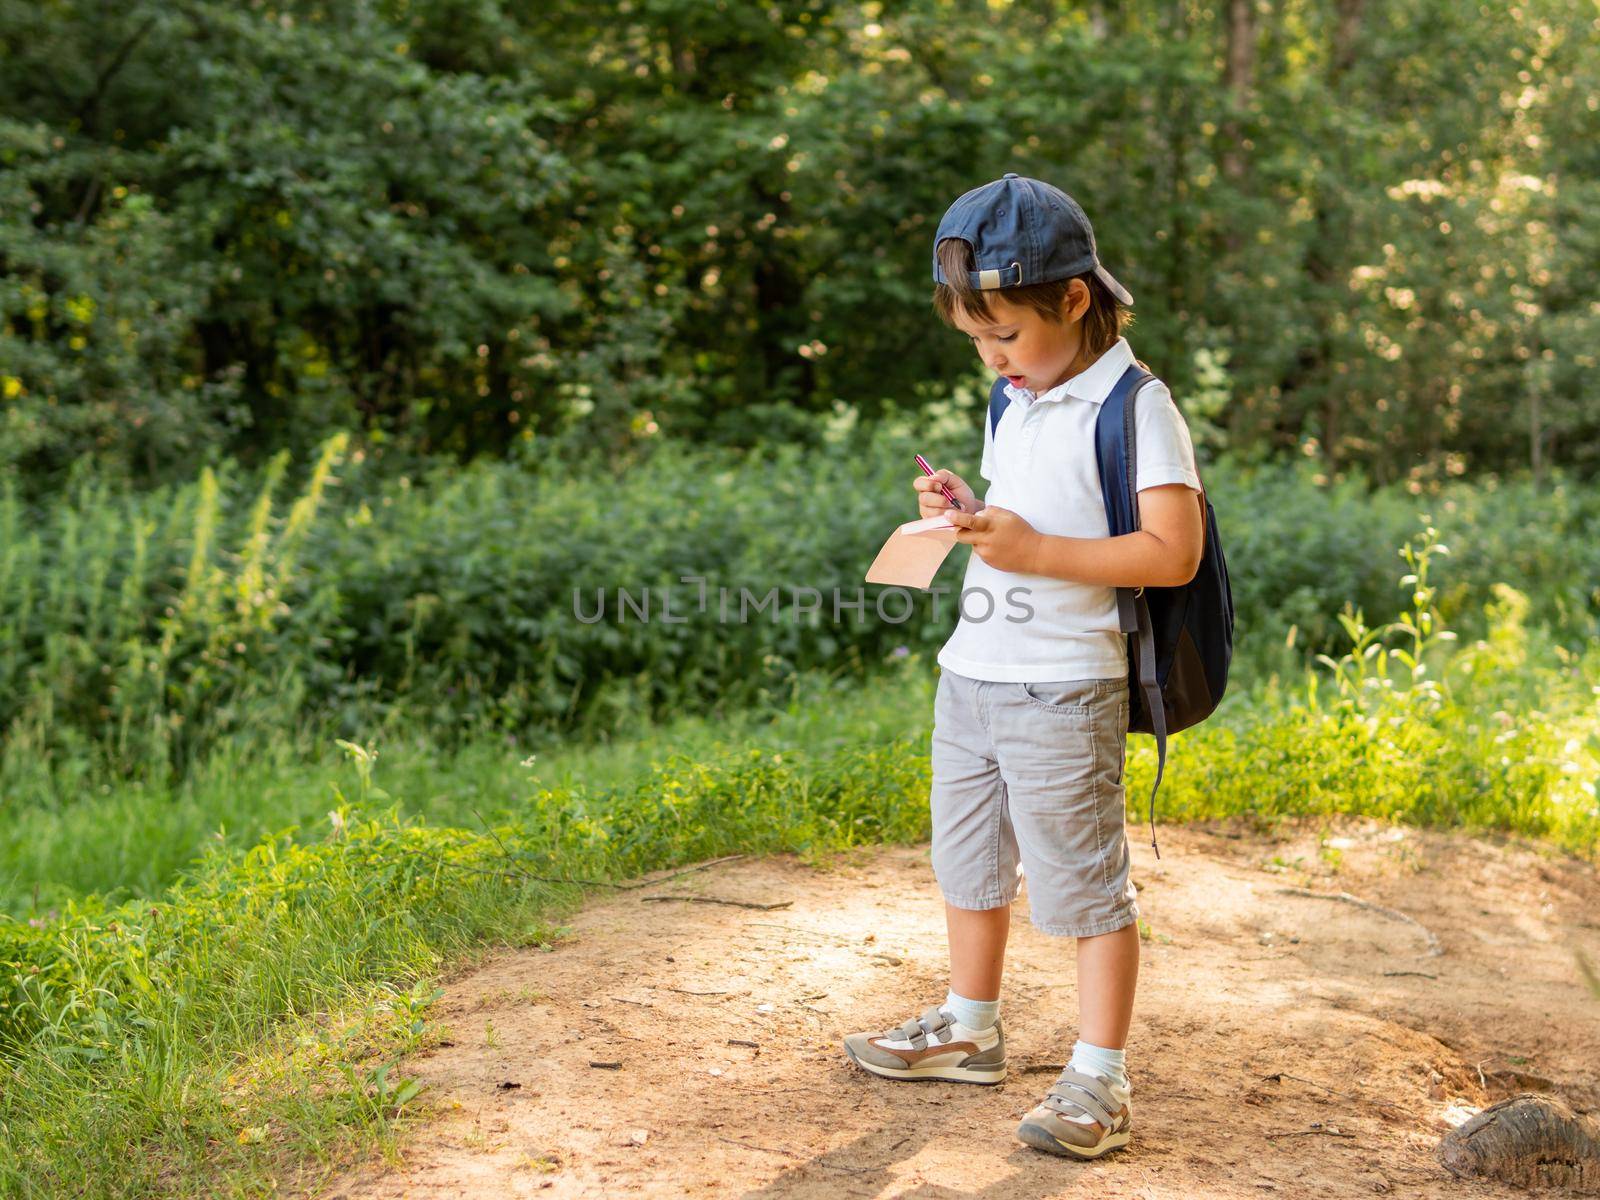 Mindful boy writes something in notebook while walking in forest. Exploring nature. Summer outdoor recreation. Healthy lifestyle.